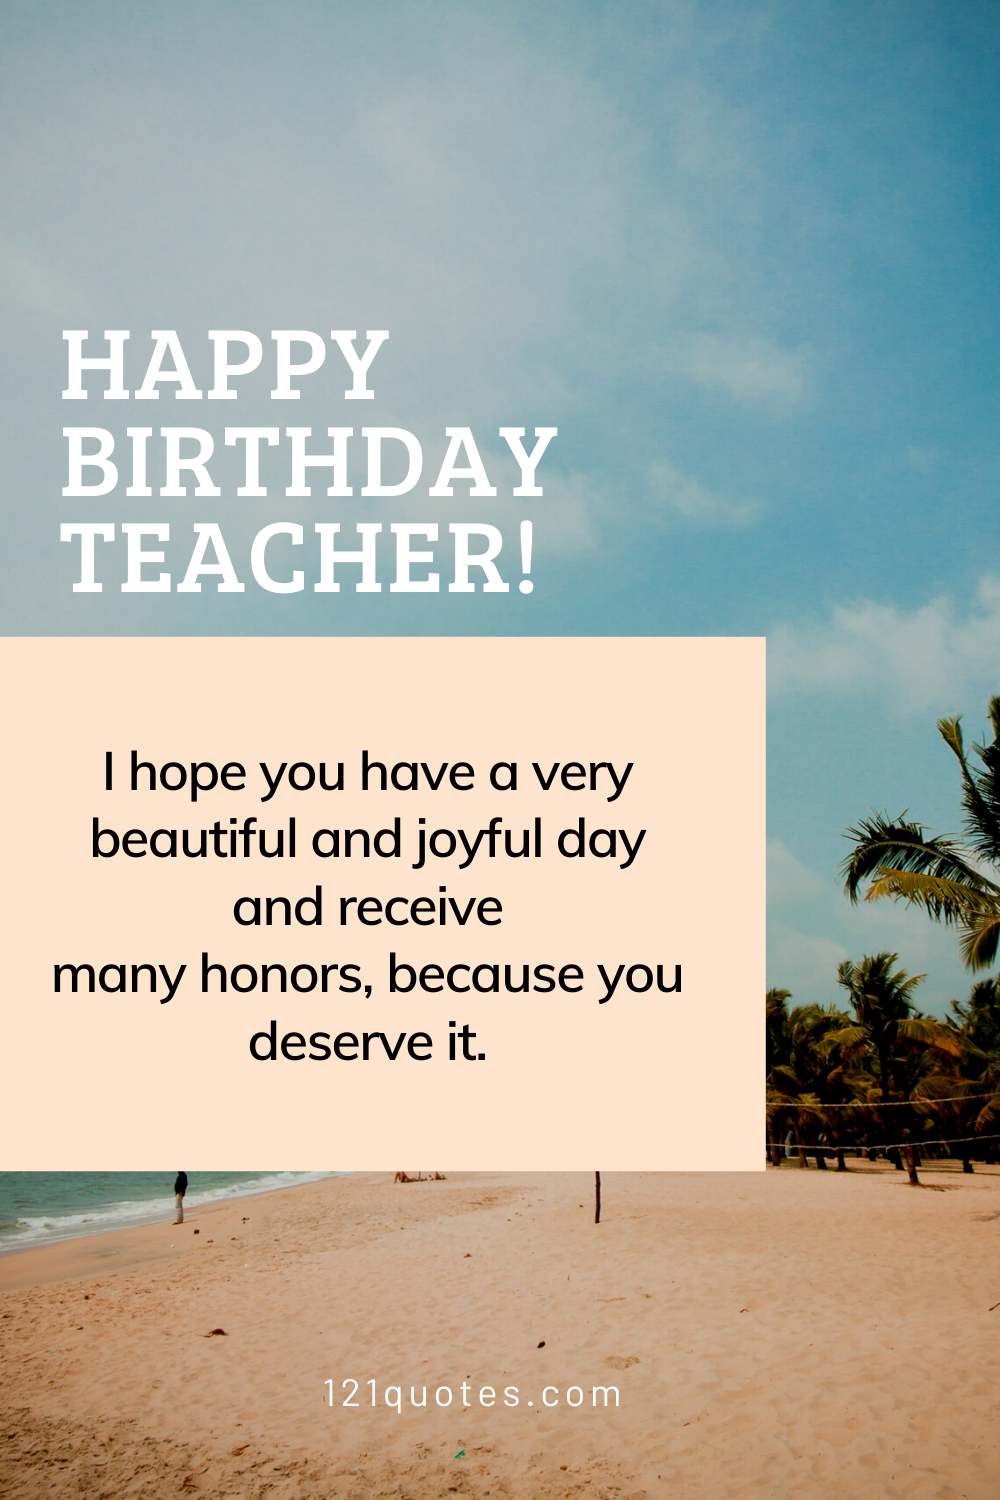 100+ Beautiful Birthday Wishes for Teacher With Beautiful Images